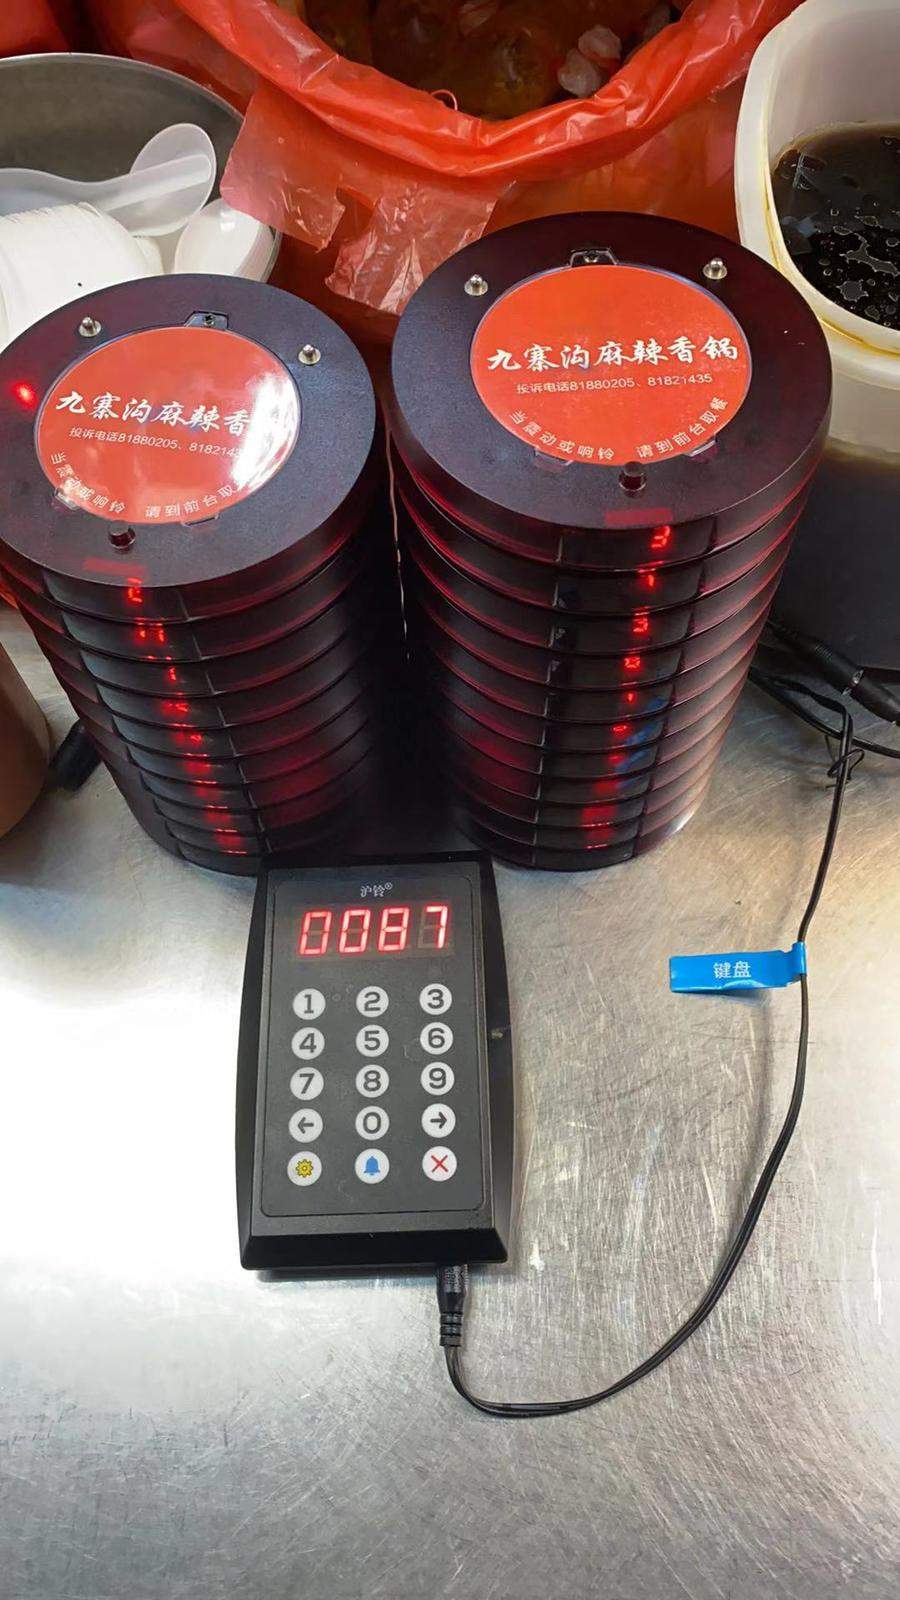 Paging system used at Man Tang Hong (Image courtesy of Happy Folks Pte Ltd)